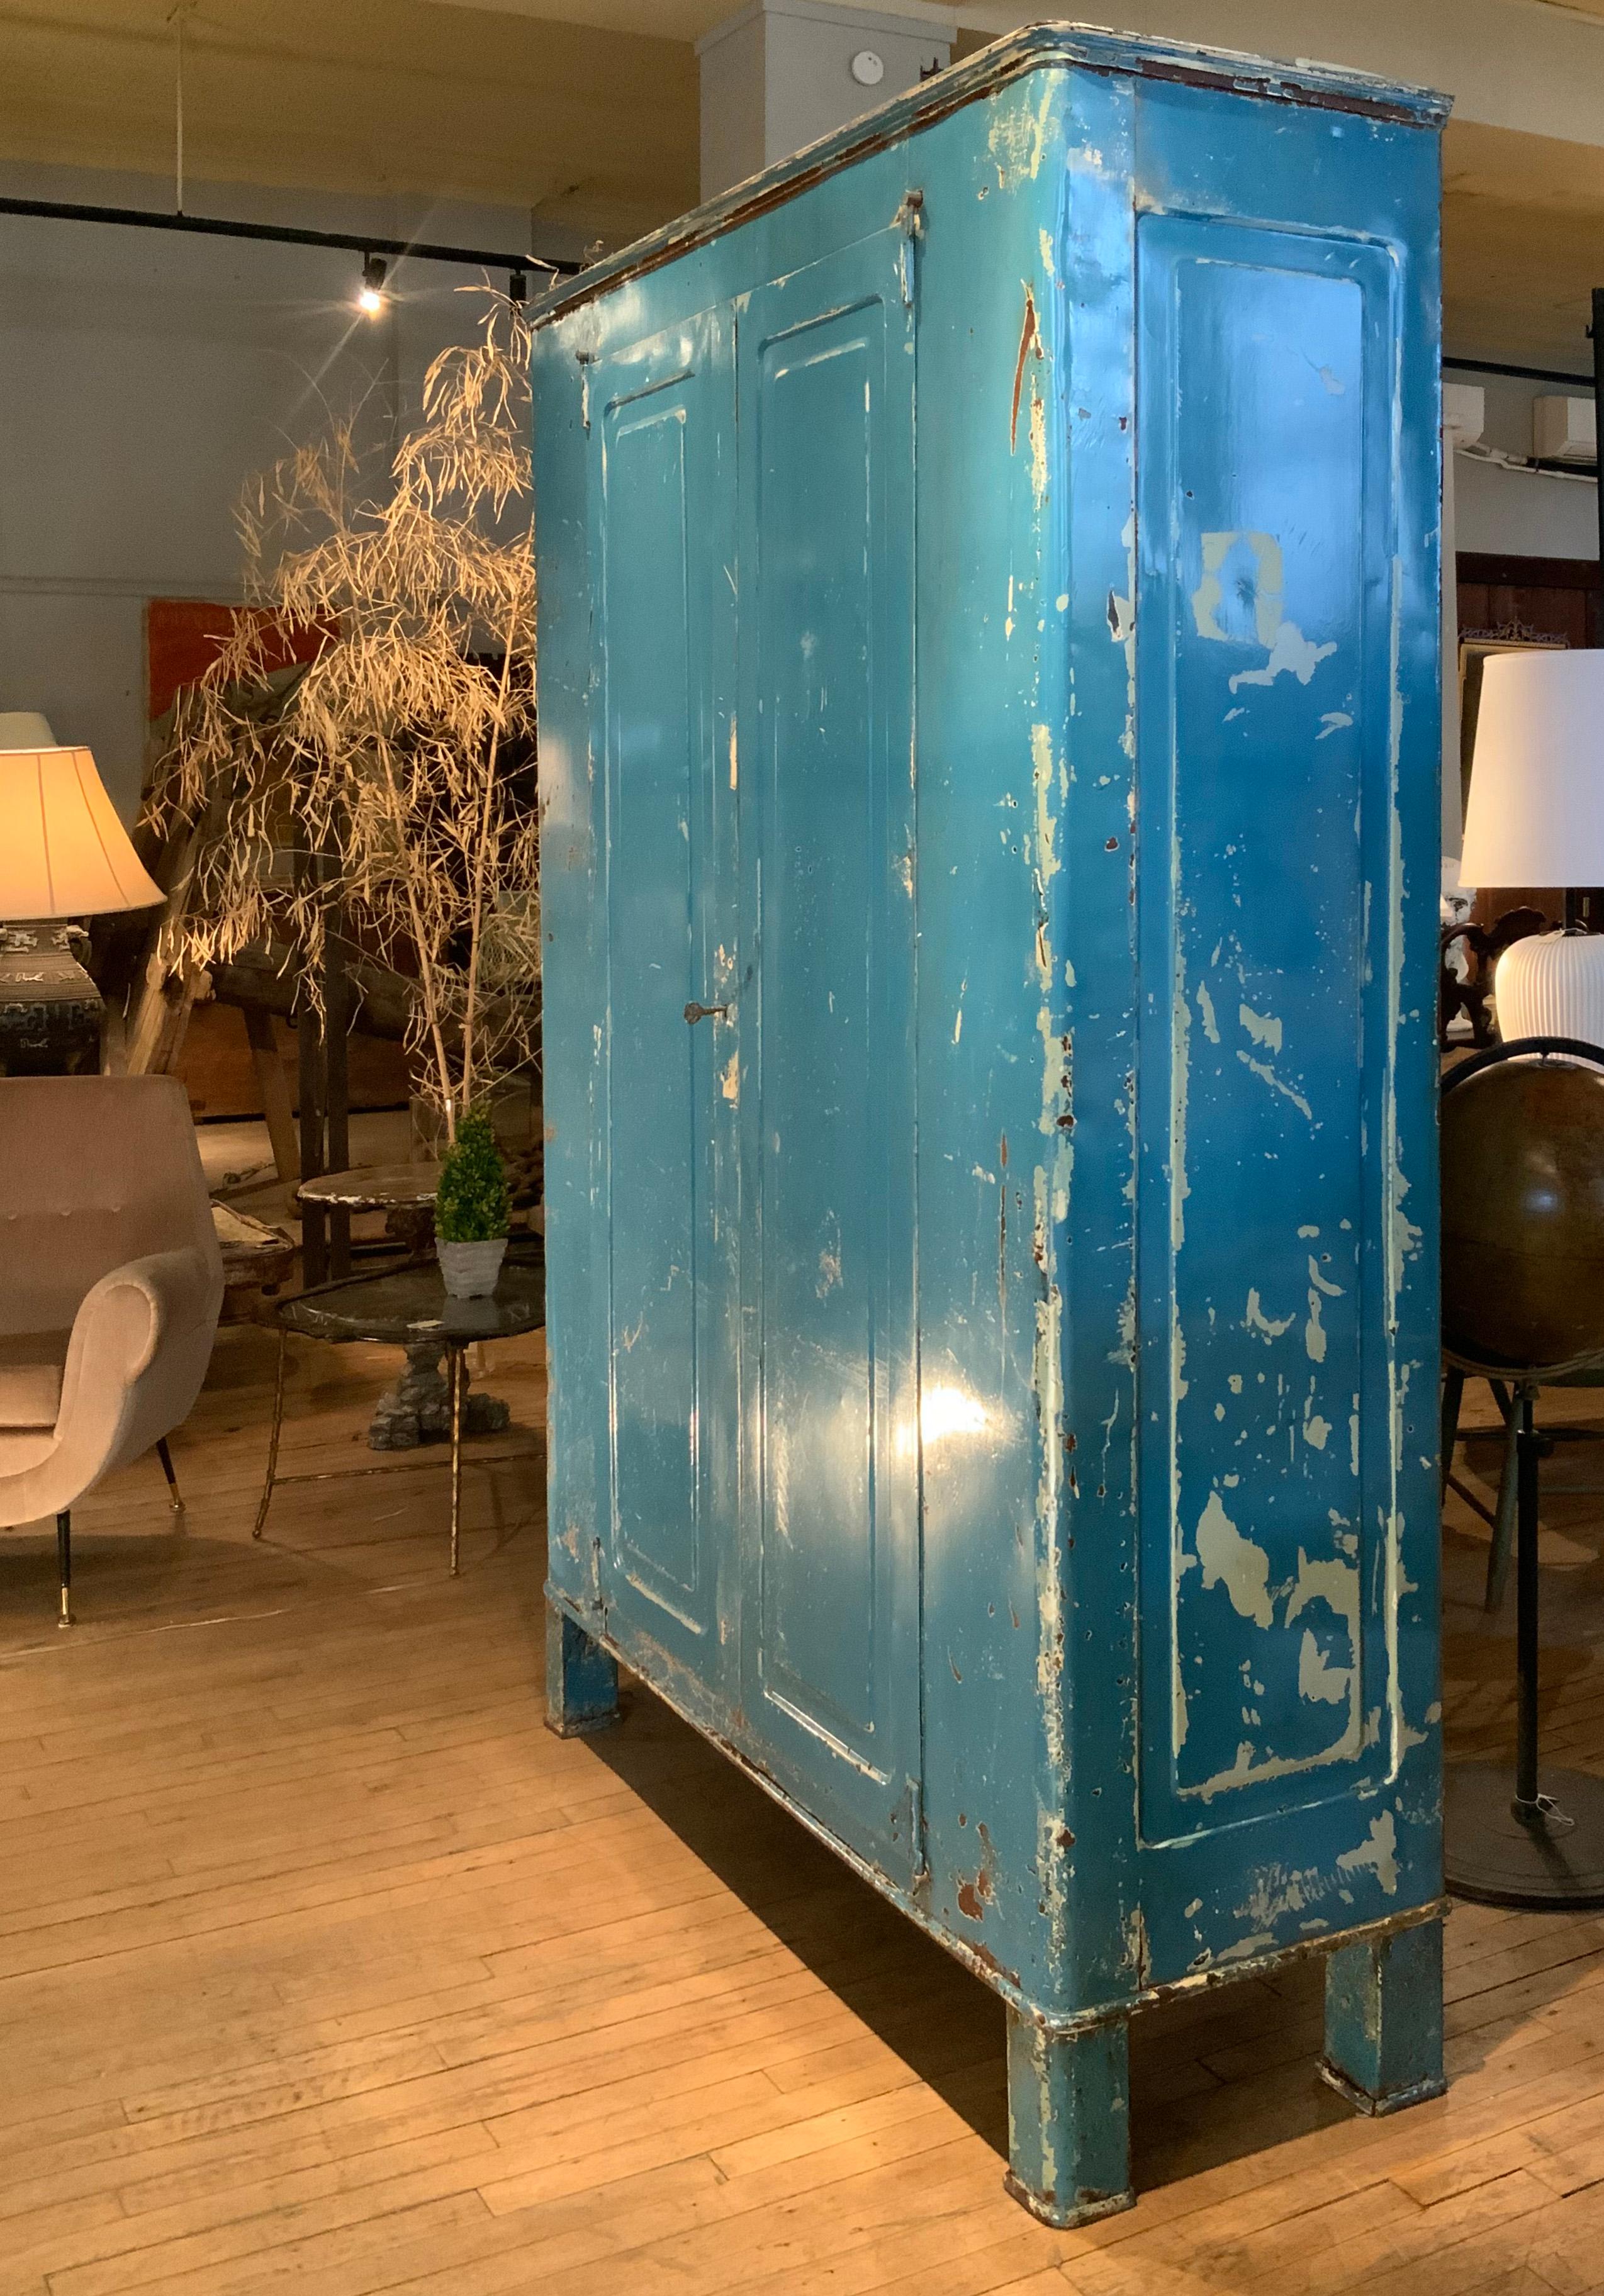 An amazing 1940's Italian steel cabinet, in its original Mediterranean Blue painted finish, with a pair of hinged doors, and a white painted interior with full width and deep shelves. the case is raised on steel legs with curved corners to match the